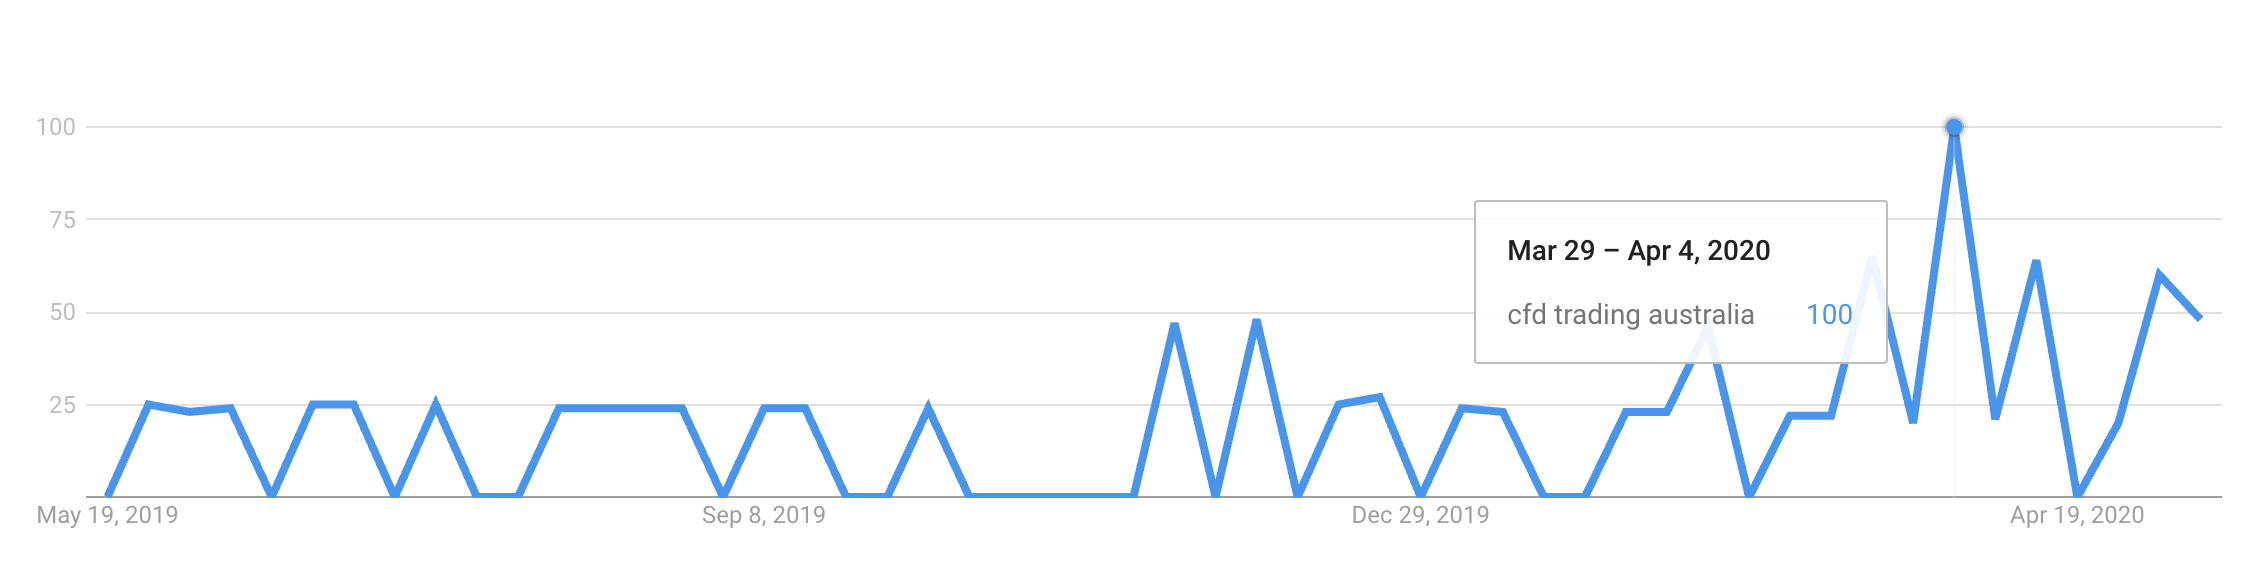 The search term "CFD trading australia" was 3x more popular in March/April 2020